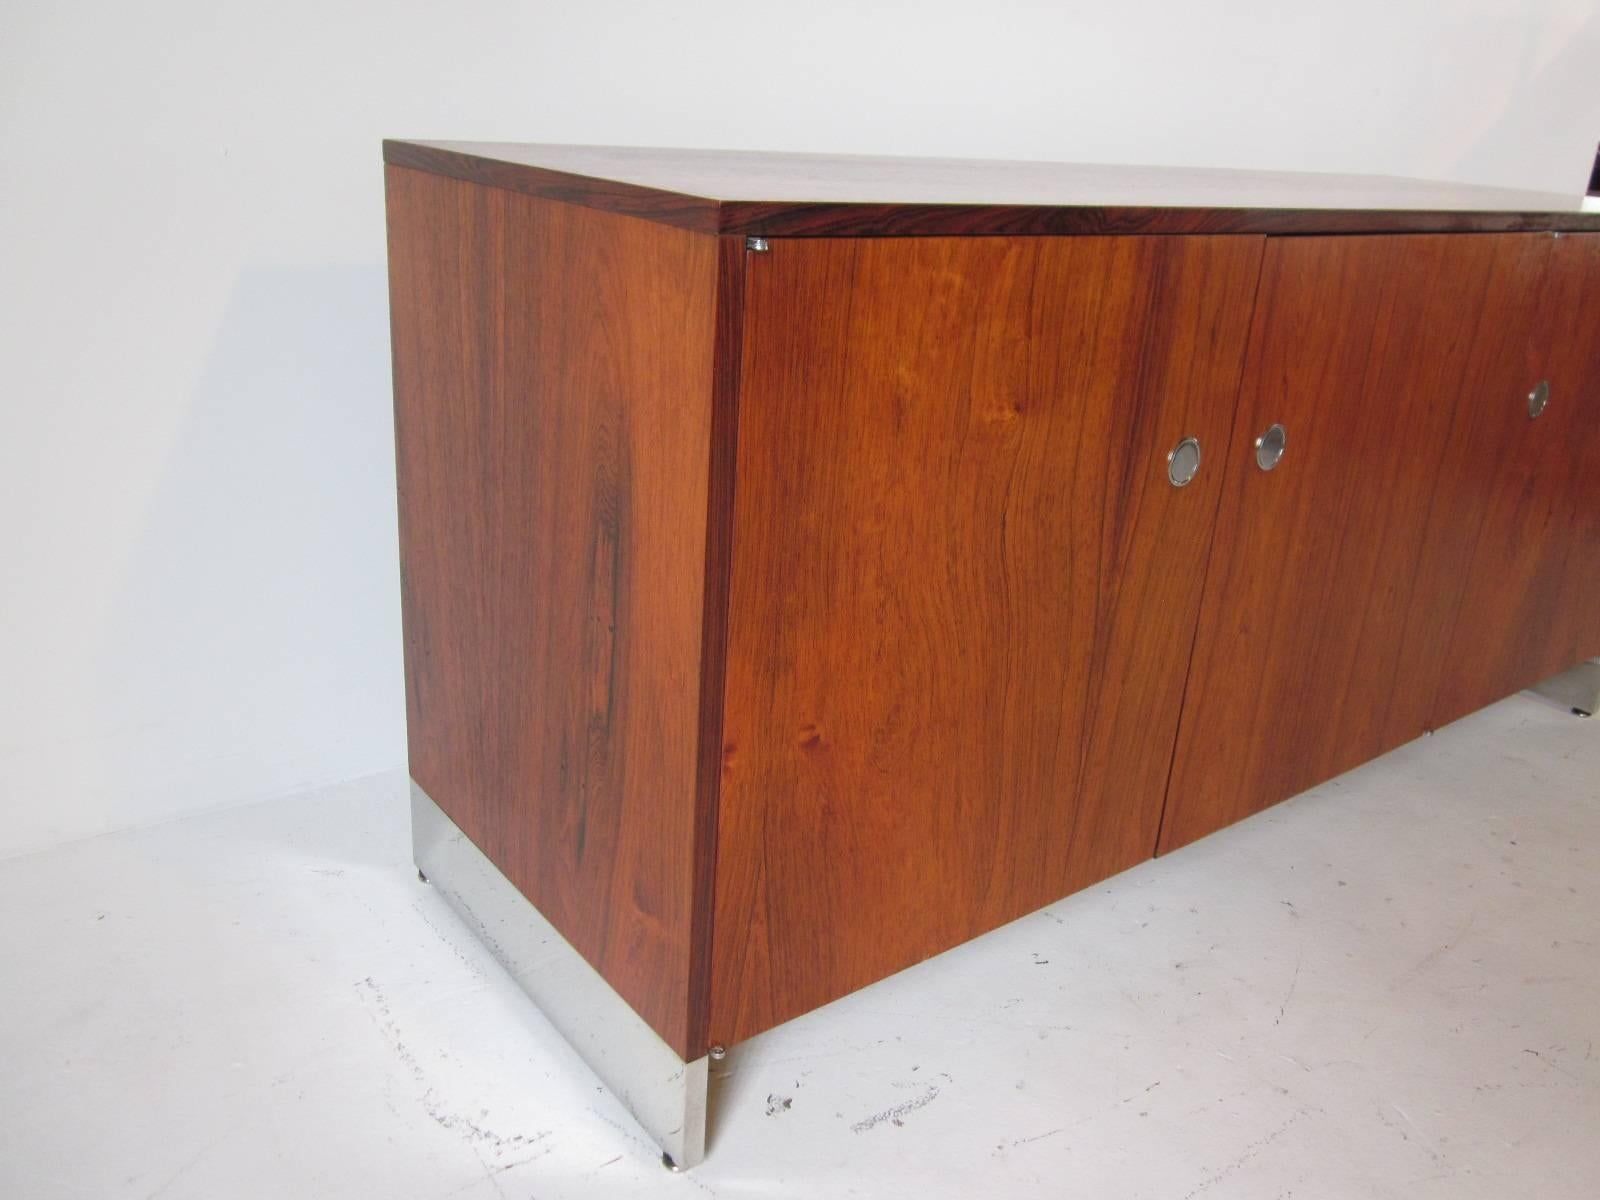 A well grained Brazilian rosewood three-door credenza with chrome disk flip pulls and chrome plinth styled legs. Inside there are two adjustable shelves and the back side of the credenza is covered in the same rosewood so this piece can float or